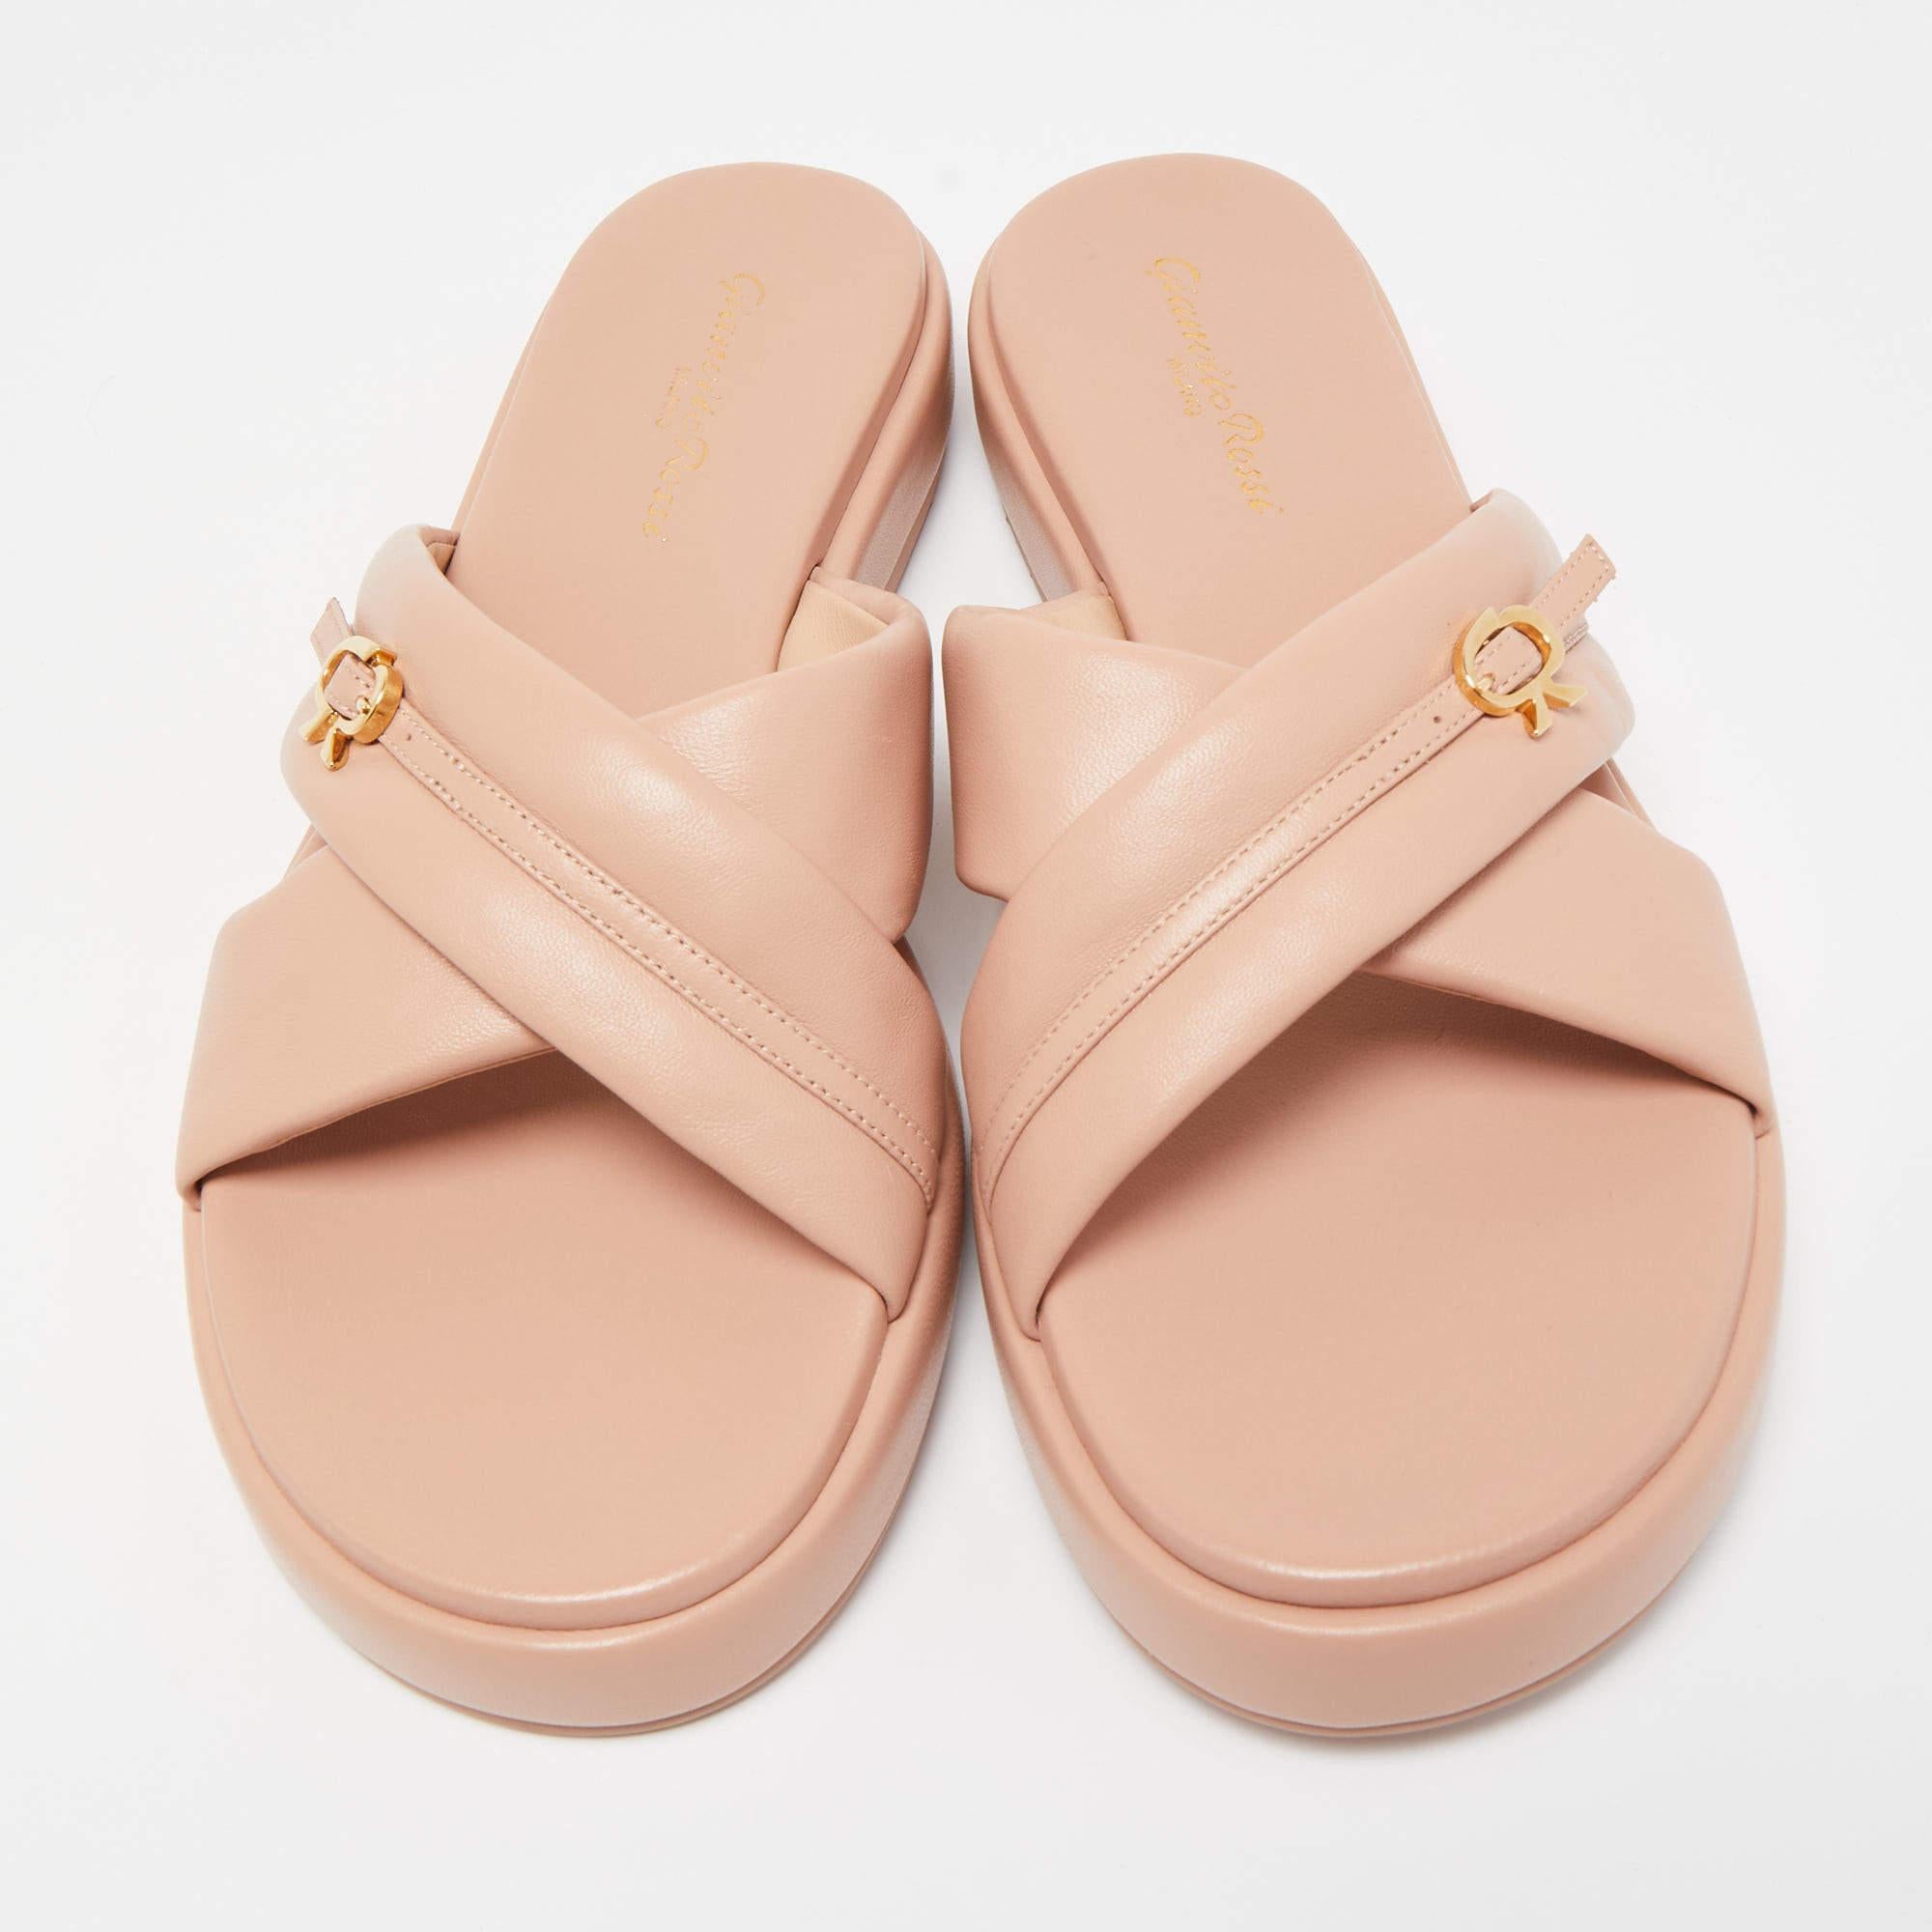 Wear these designer sandals to spruce up any outfit. They are versatile, chic, and can be easily styled. Made using quality materials, these sandals are well-built and long-lasting.

Includes: Original Dustbag, Original Box, Info Booklet

